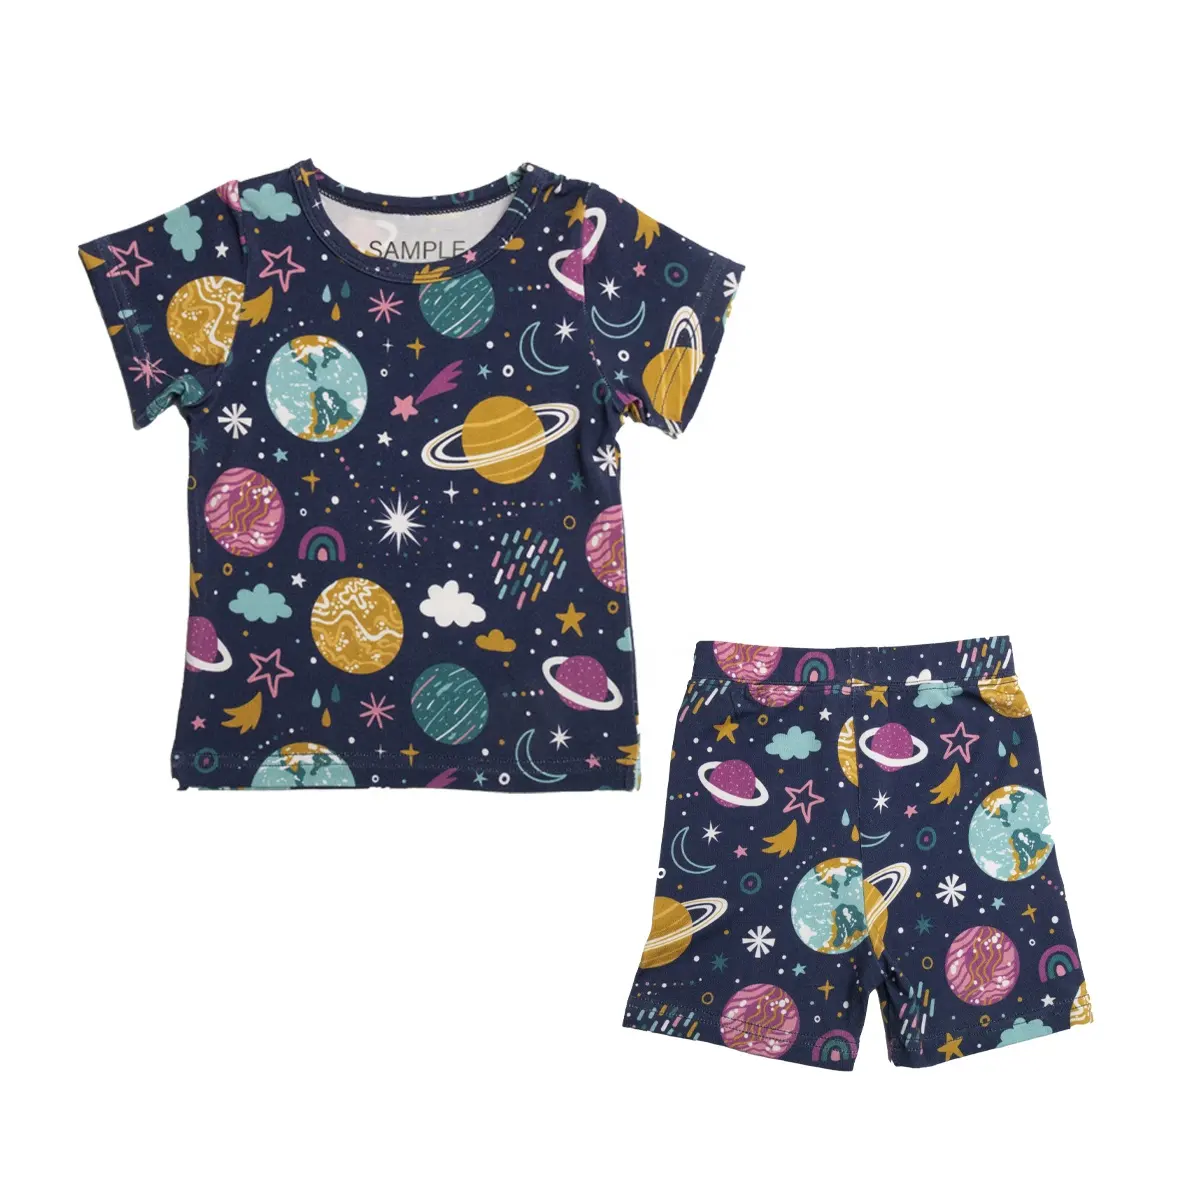 Wholesale Baby Kids Summer Short Sleeve Clothing Set Kids Toddler Baby Infant Two Pieces Pajamas Outfits Set